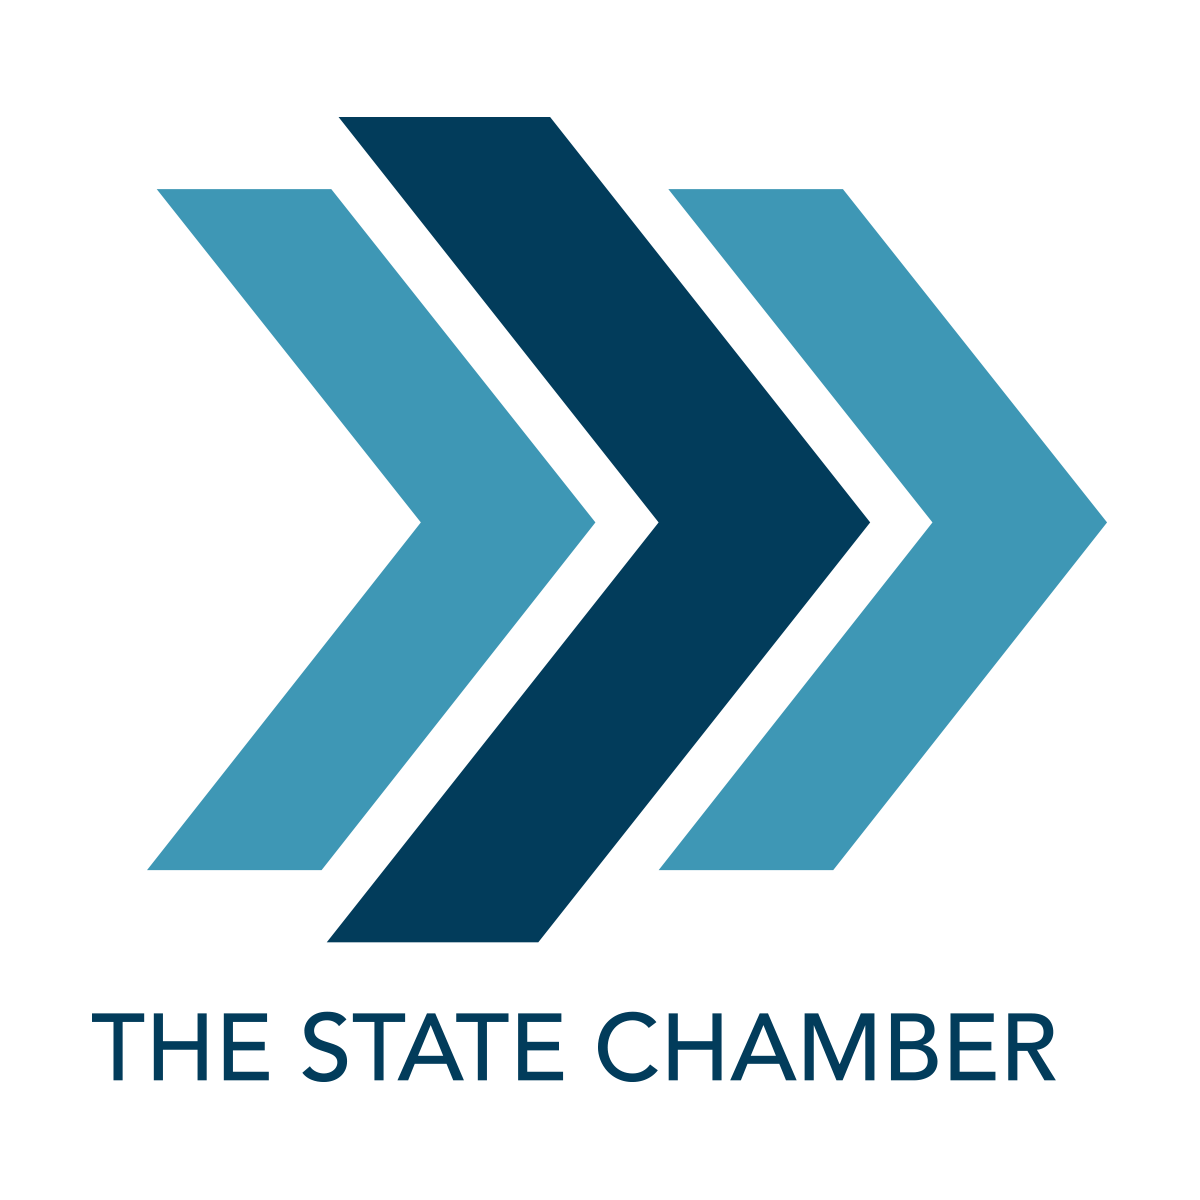 Welcome to The State Chamber of Oklahoma